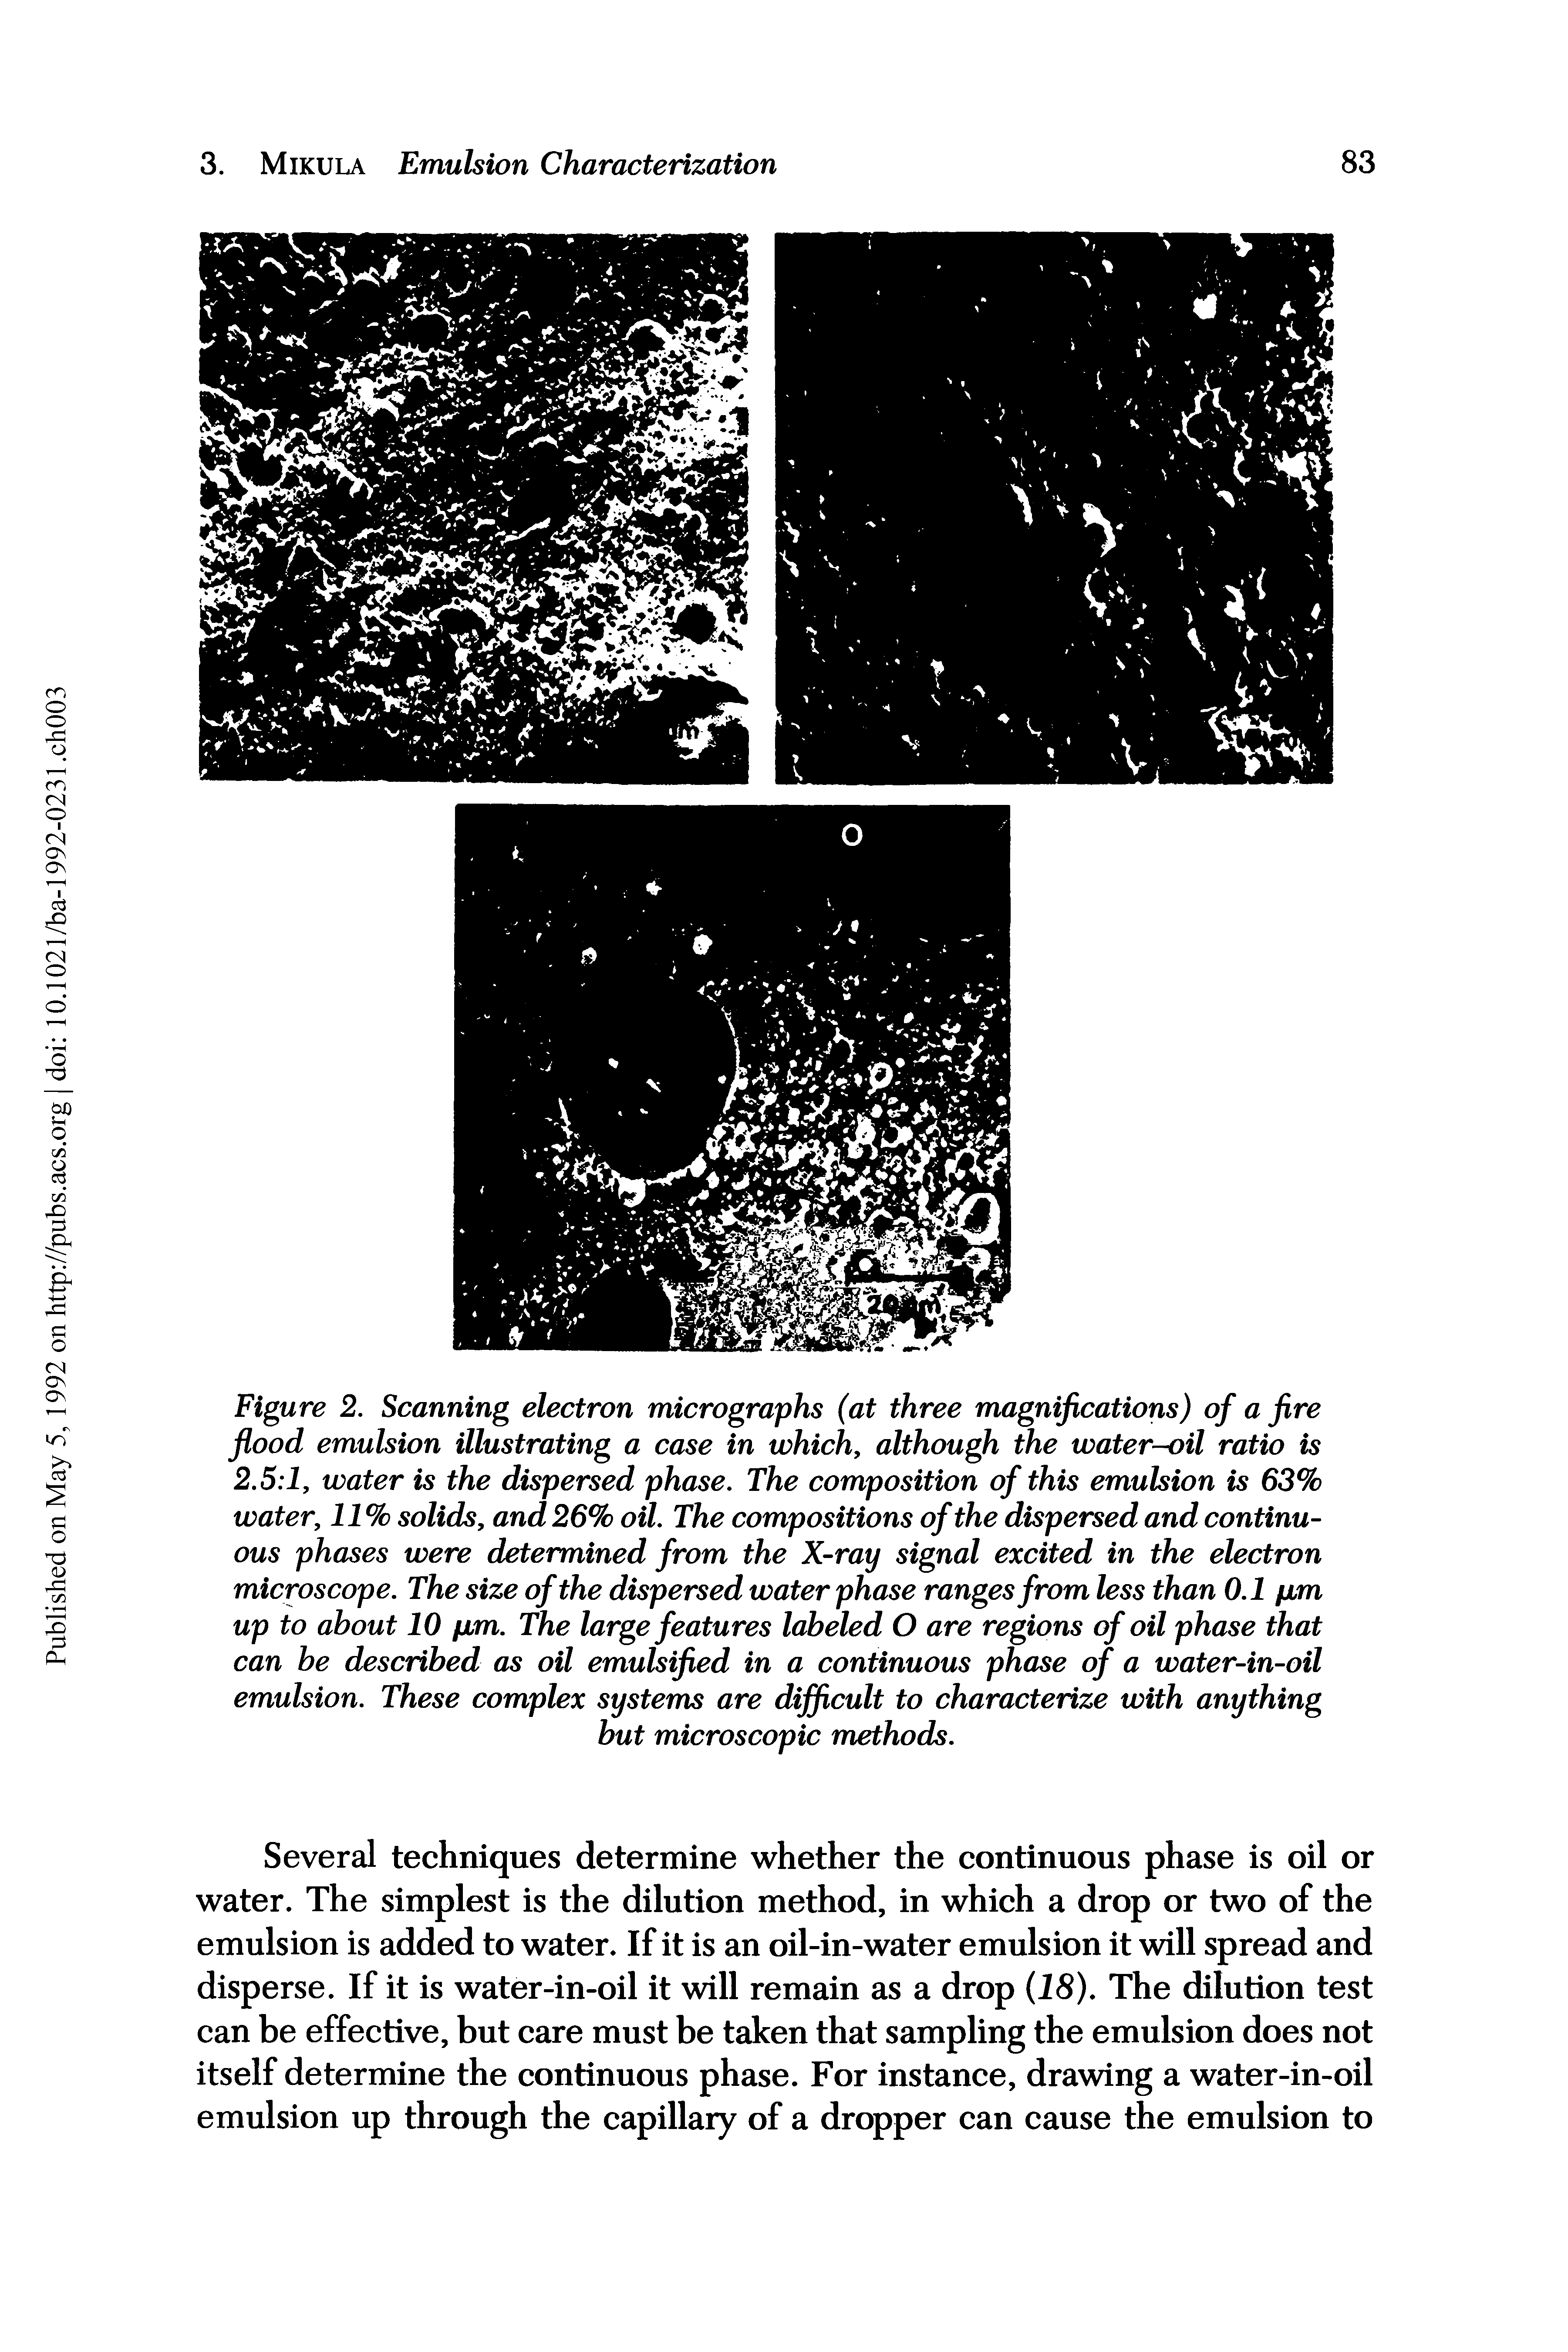 Figure 2. Scanning electron micrographs (at three magnifications) of a fire flood emulsion illustrating a case in which, although the water-oil ratio is 2.5 1, water is the dispersed phase. The composition of this emulsion is 63% water, 11% solids, and 26% oil. The compositions of the dispersed and continuous phases were determined from the X-ray signal excited in the electron microscope. The size of the dispersed water phase ranges from less than 0.1 pm up to about 10 pm. The large features labeled O are regions of oil phase that can be described as oil emulsified in a continuous phase of a water-in-oil emulsion. These complex systems are difficult to characterize with anything but microscopic methods.